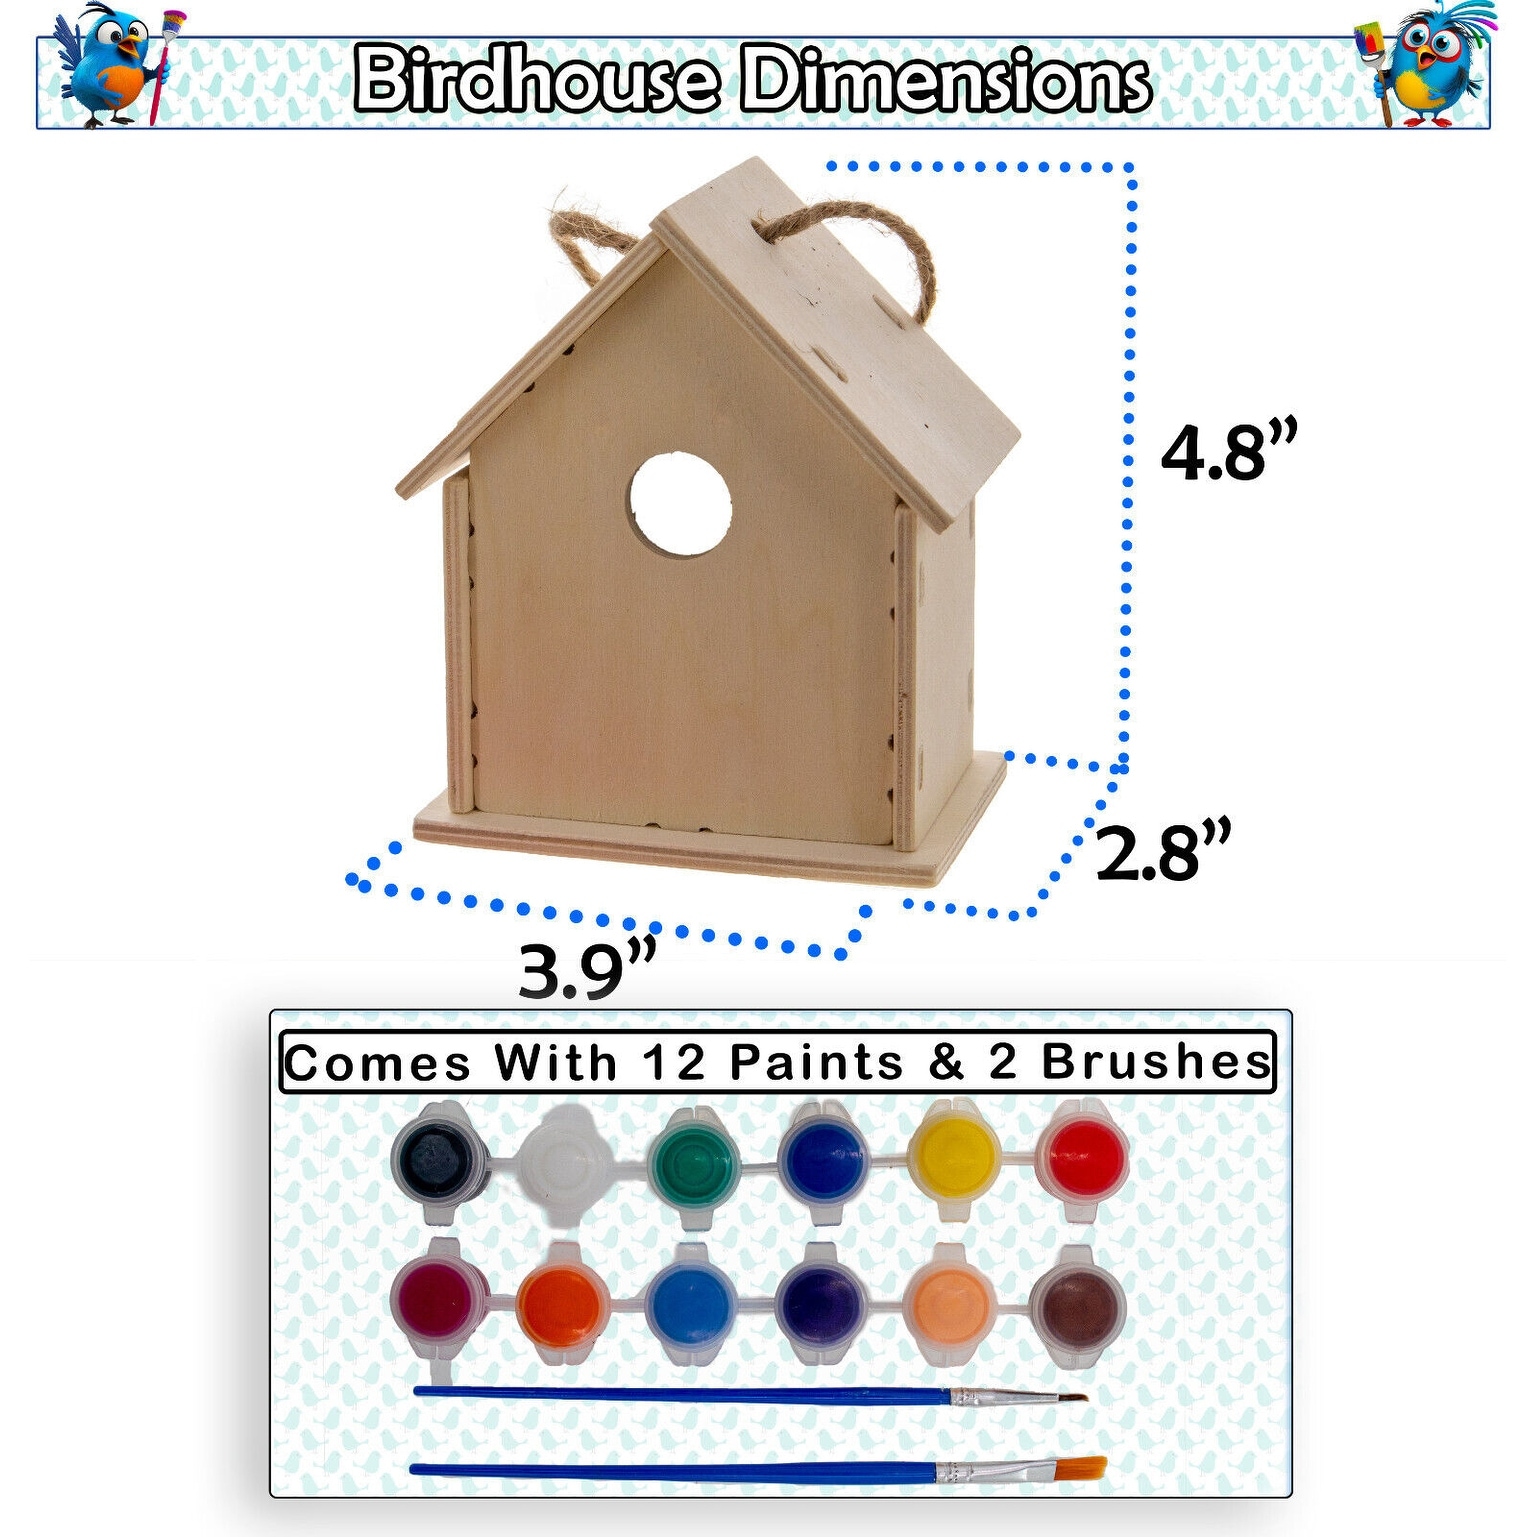 DIY Birdhouse Homemade Wooden - Build Your Own Bird House w/ Easy Painting Kit